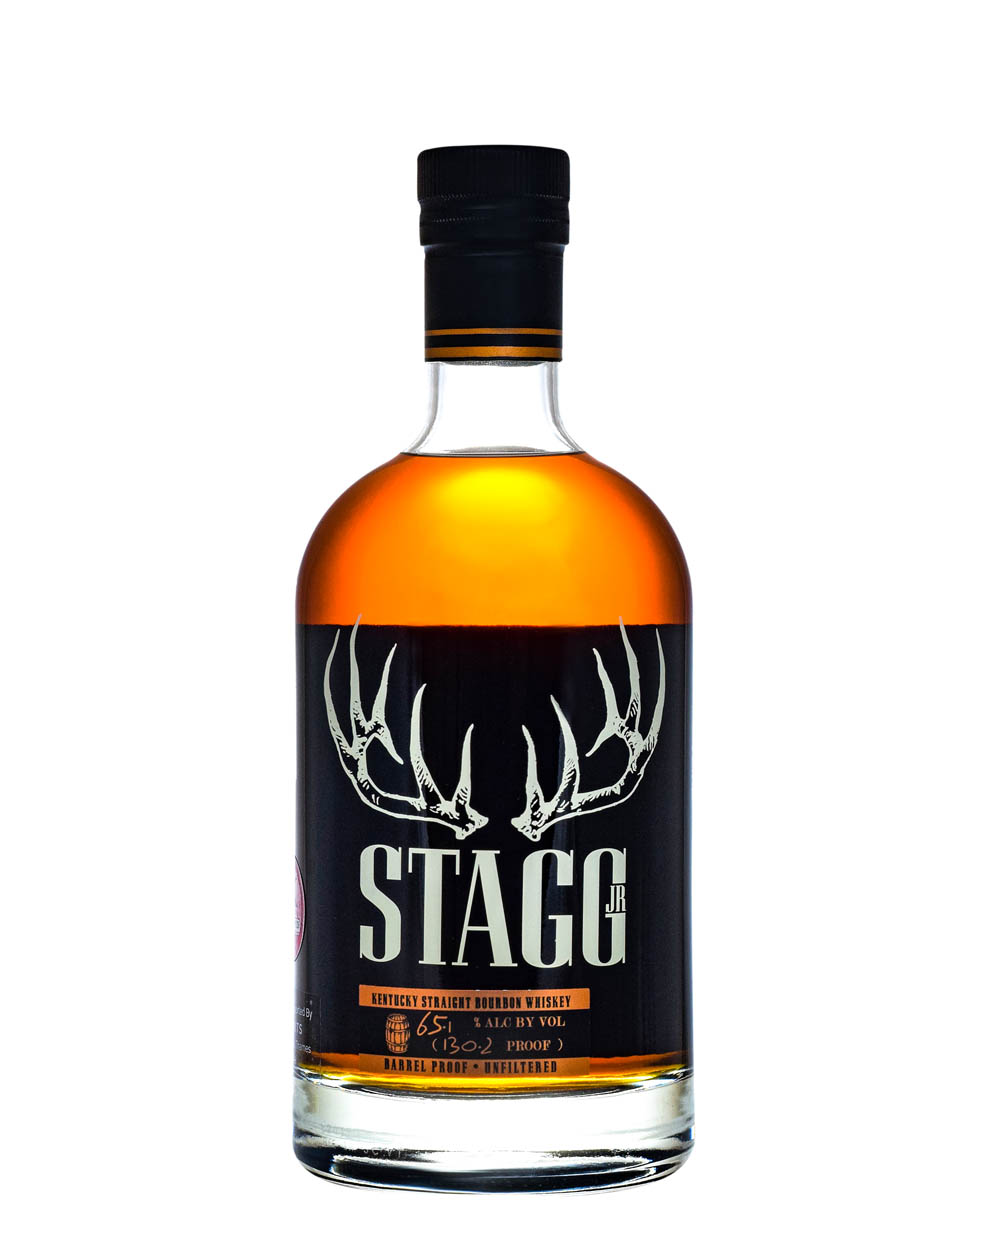 Stagg Jr Batch 14 130.2 Proof Musthave Malts MHM